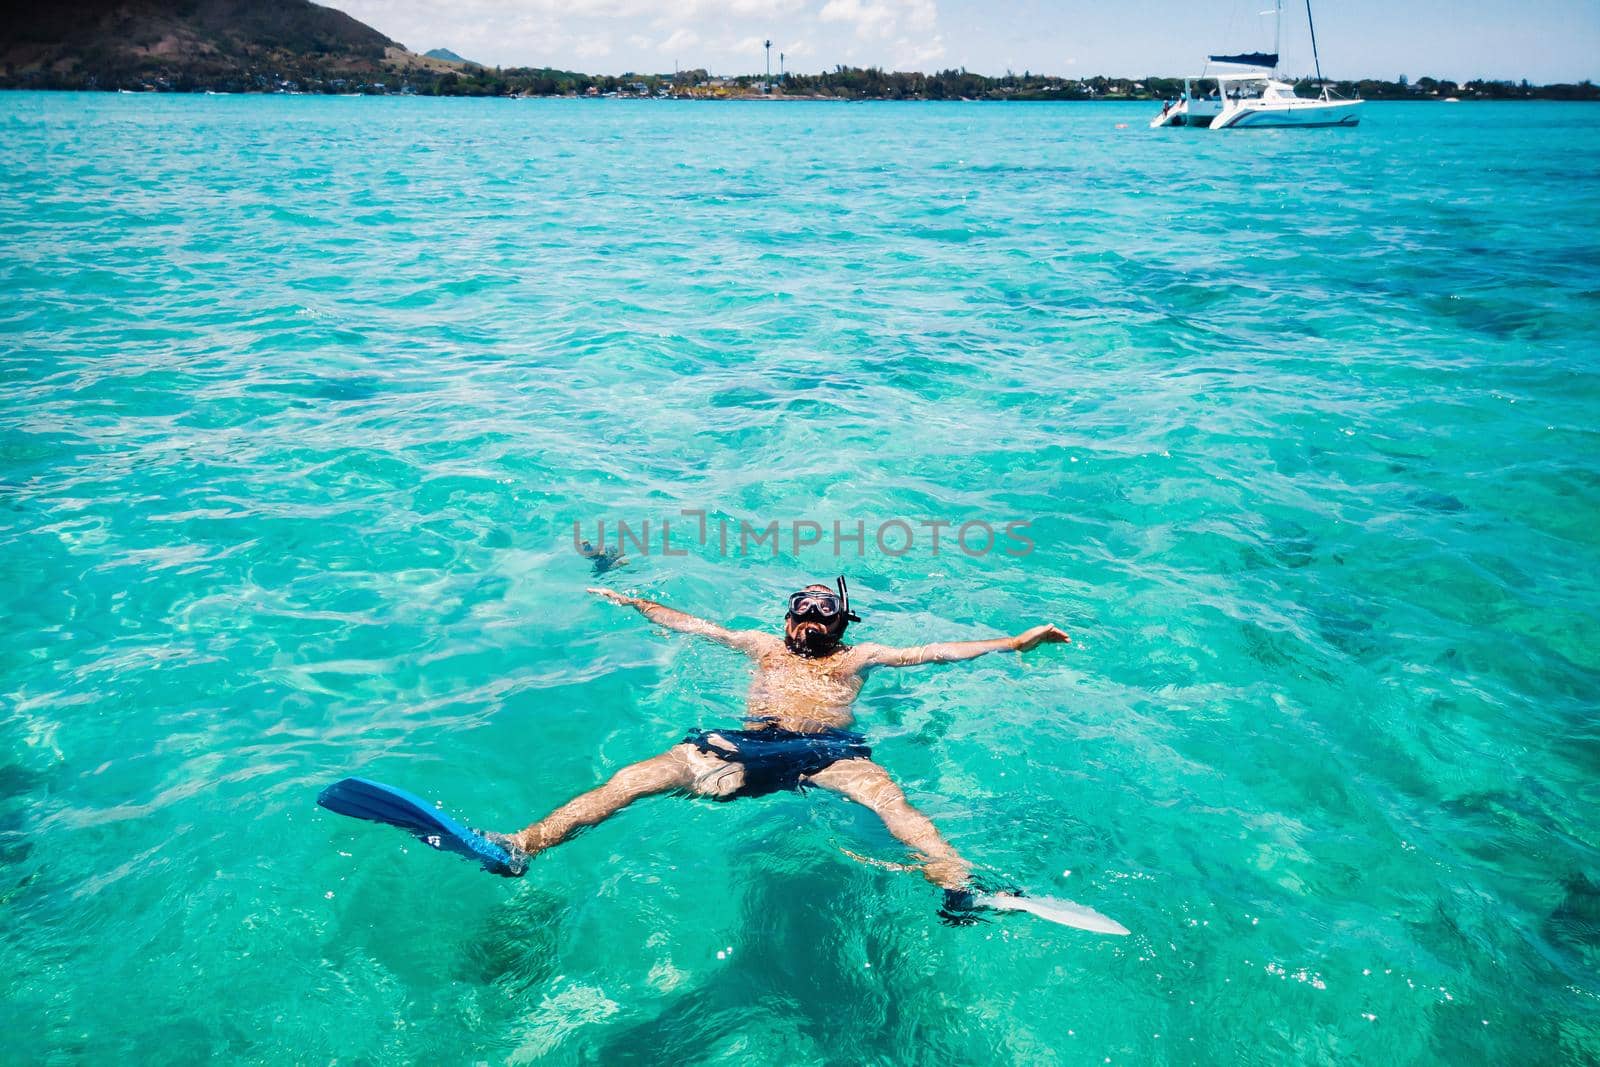 A guy in fins and a mask swims in a lagoon on the island of Mauritius.